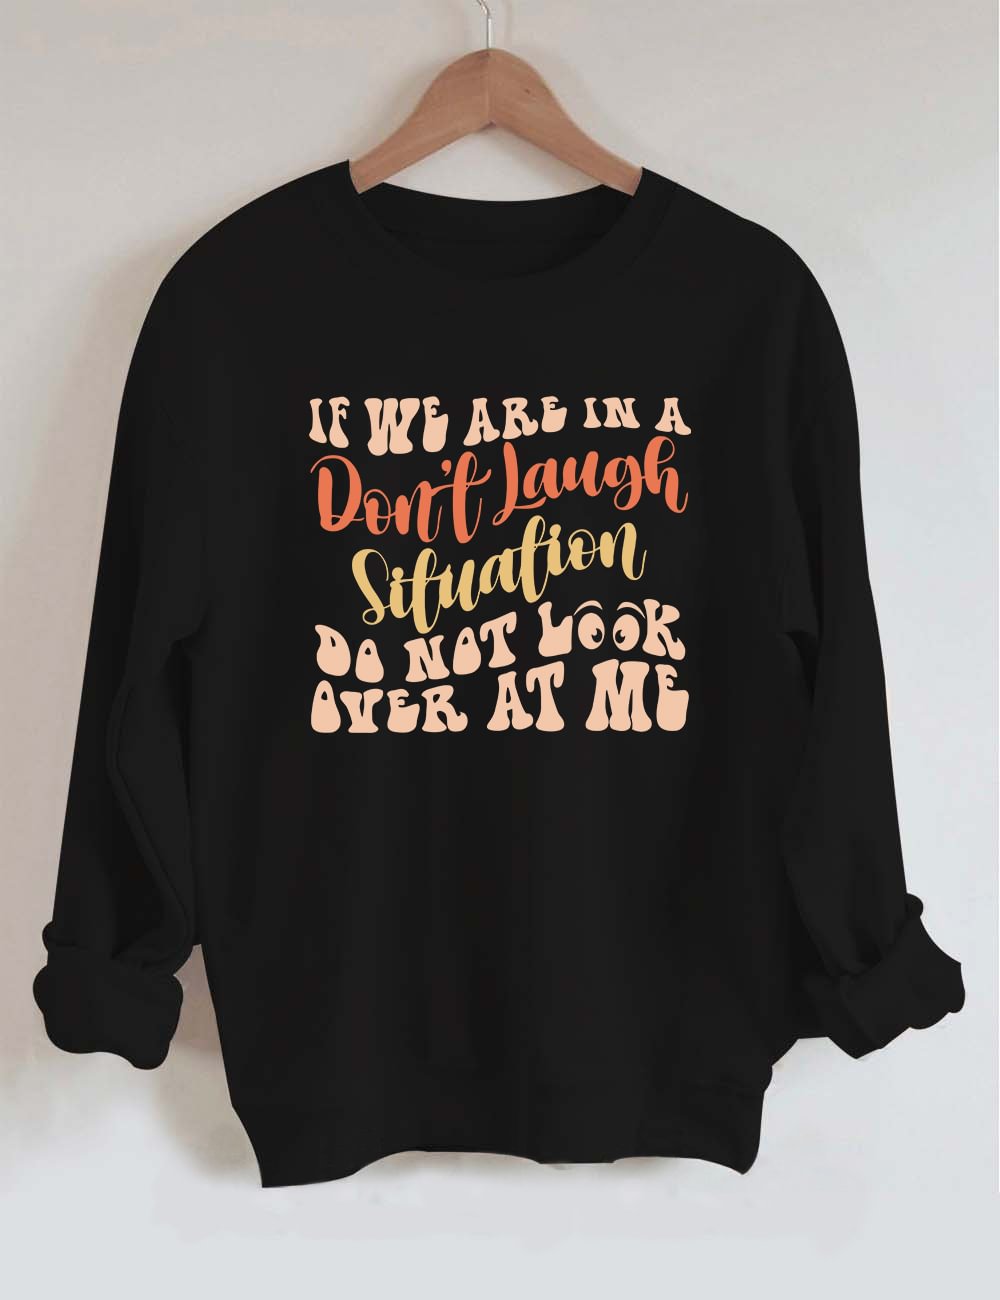 If We Are In A Don't Laugh Situation Sweatshirt